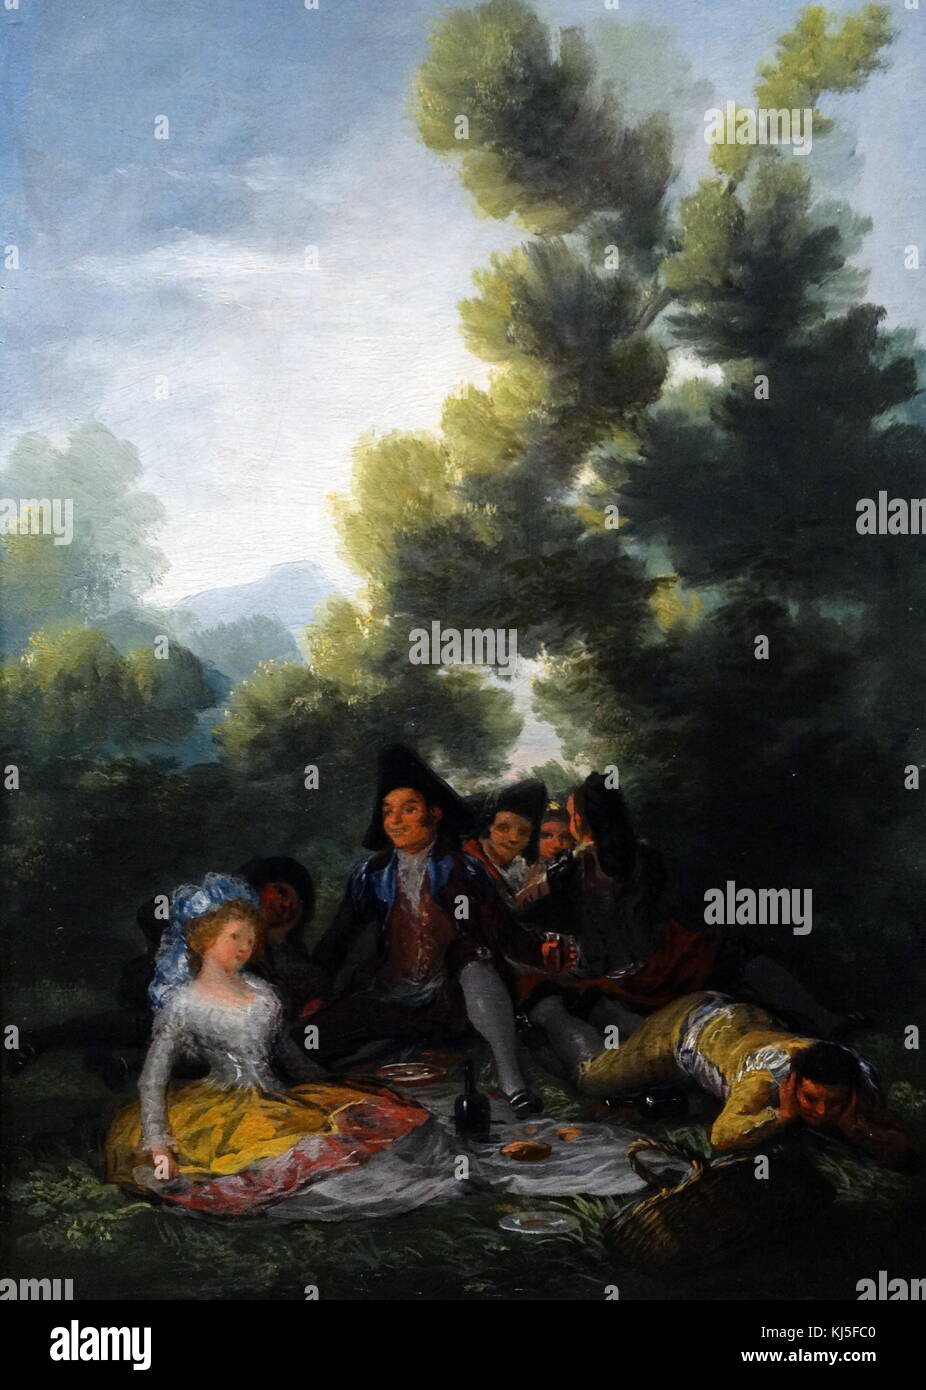 Painting titled 'A Picnic' by Francisco Goya (1746-1828) a Spanish romantic painter and printmaker. Dated 18th Century Stock Photo